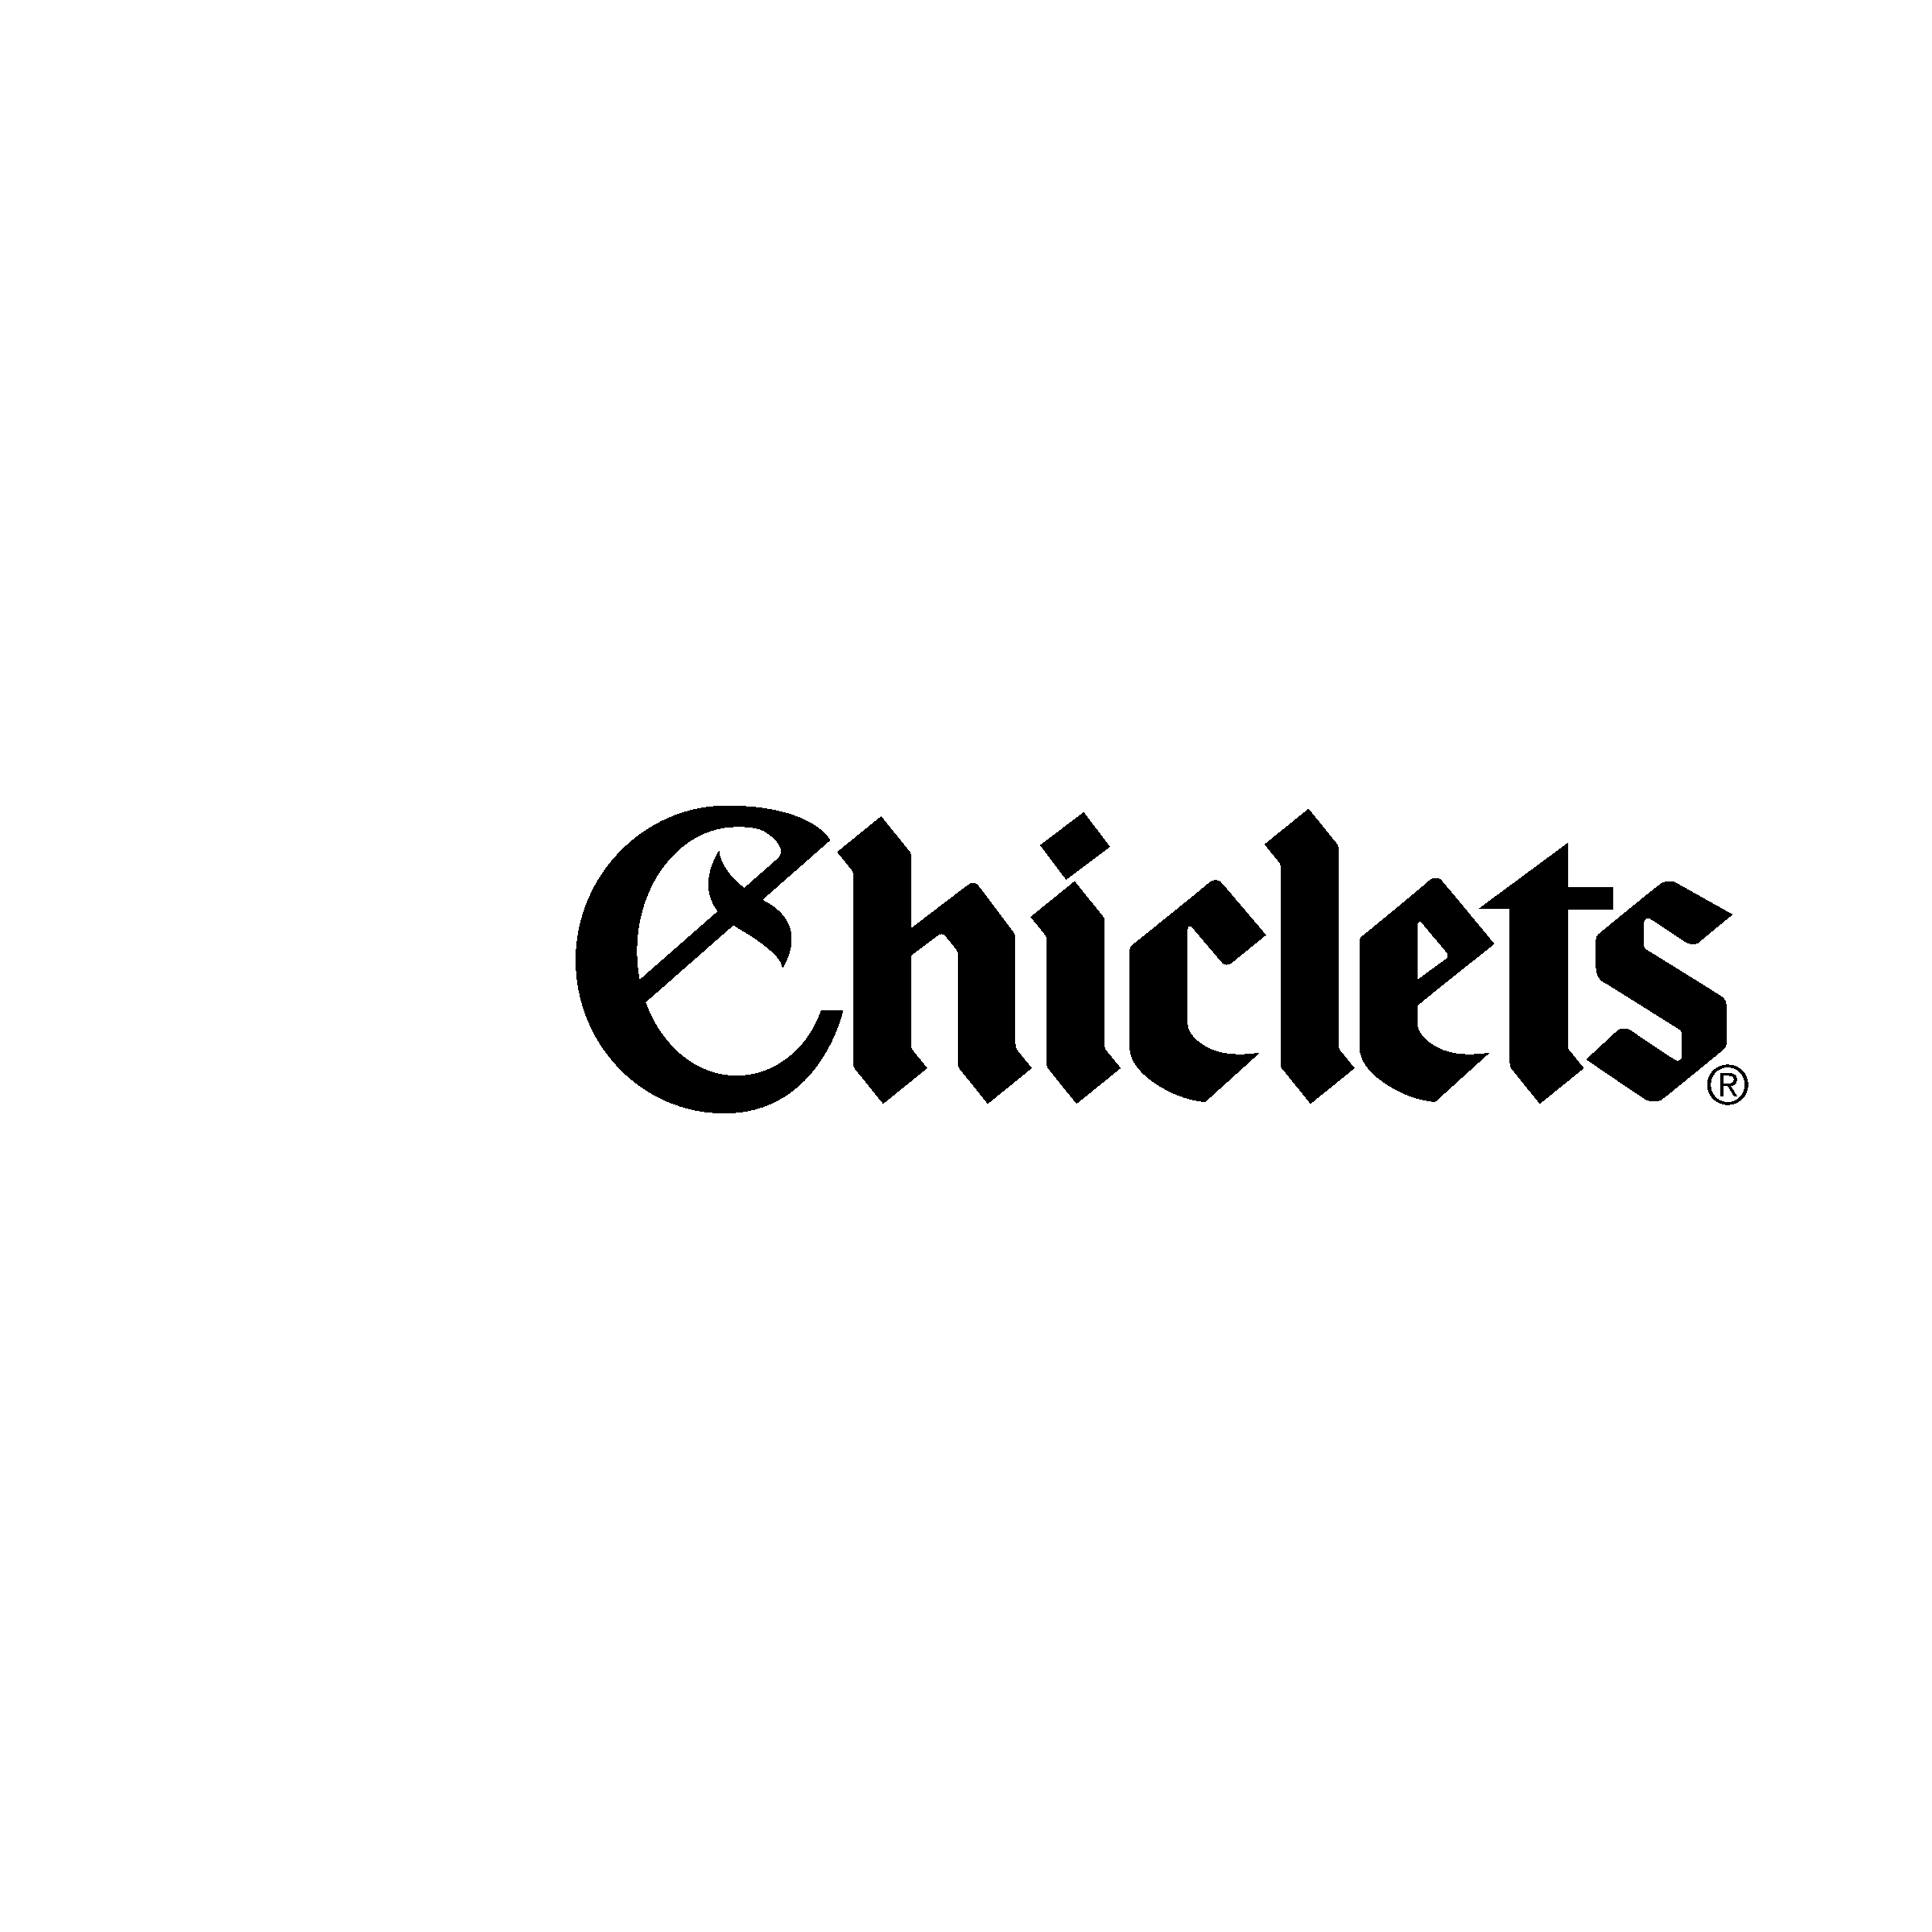 Chiclets Logo - Chiclets Logo PNG Transparent & SVG Vector - Freebie Supply